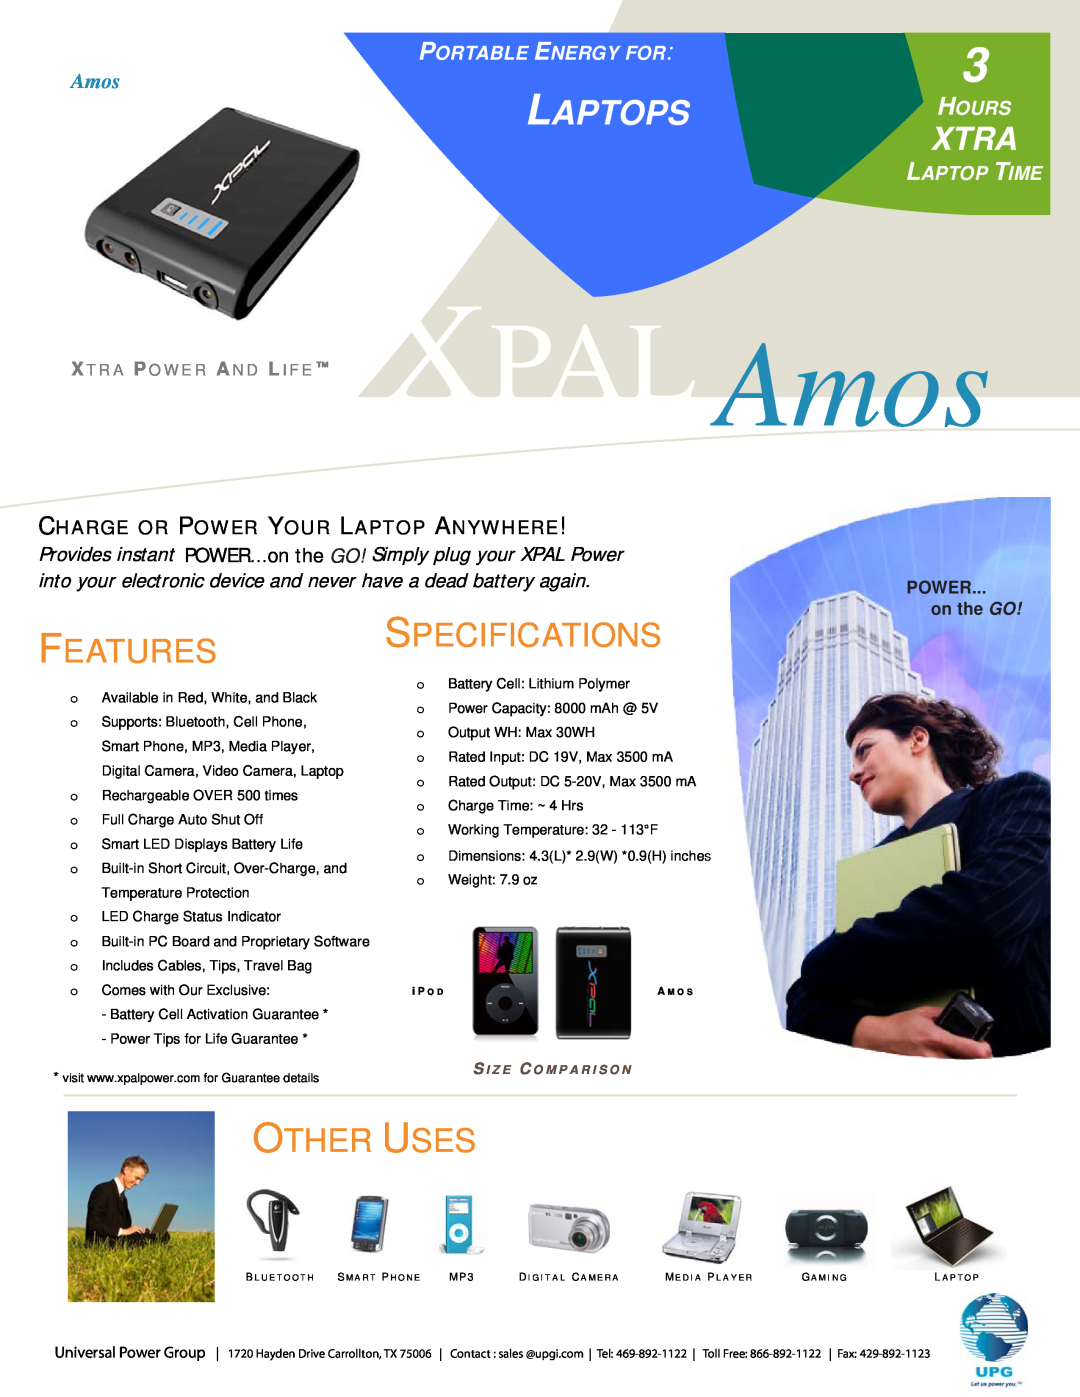 Universal Power Group XPAL Amos specifications Laptops, Features, Specifications, Other Uses, Xtra, Portable Energy For 